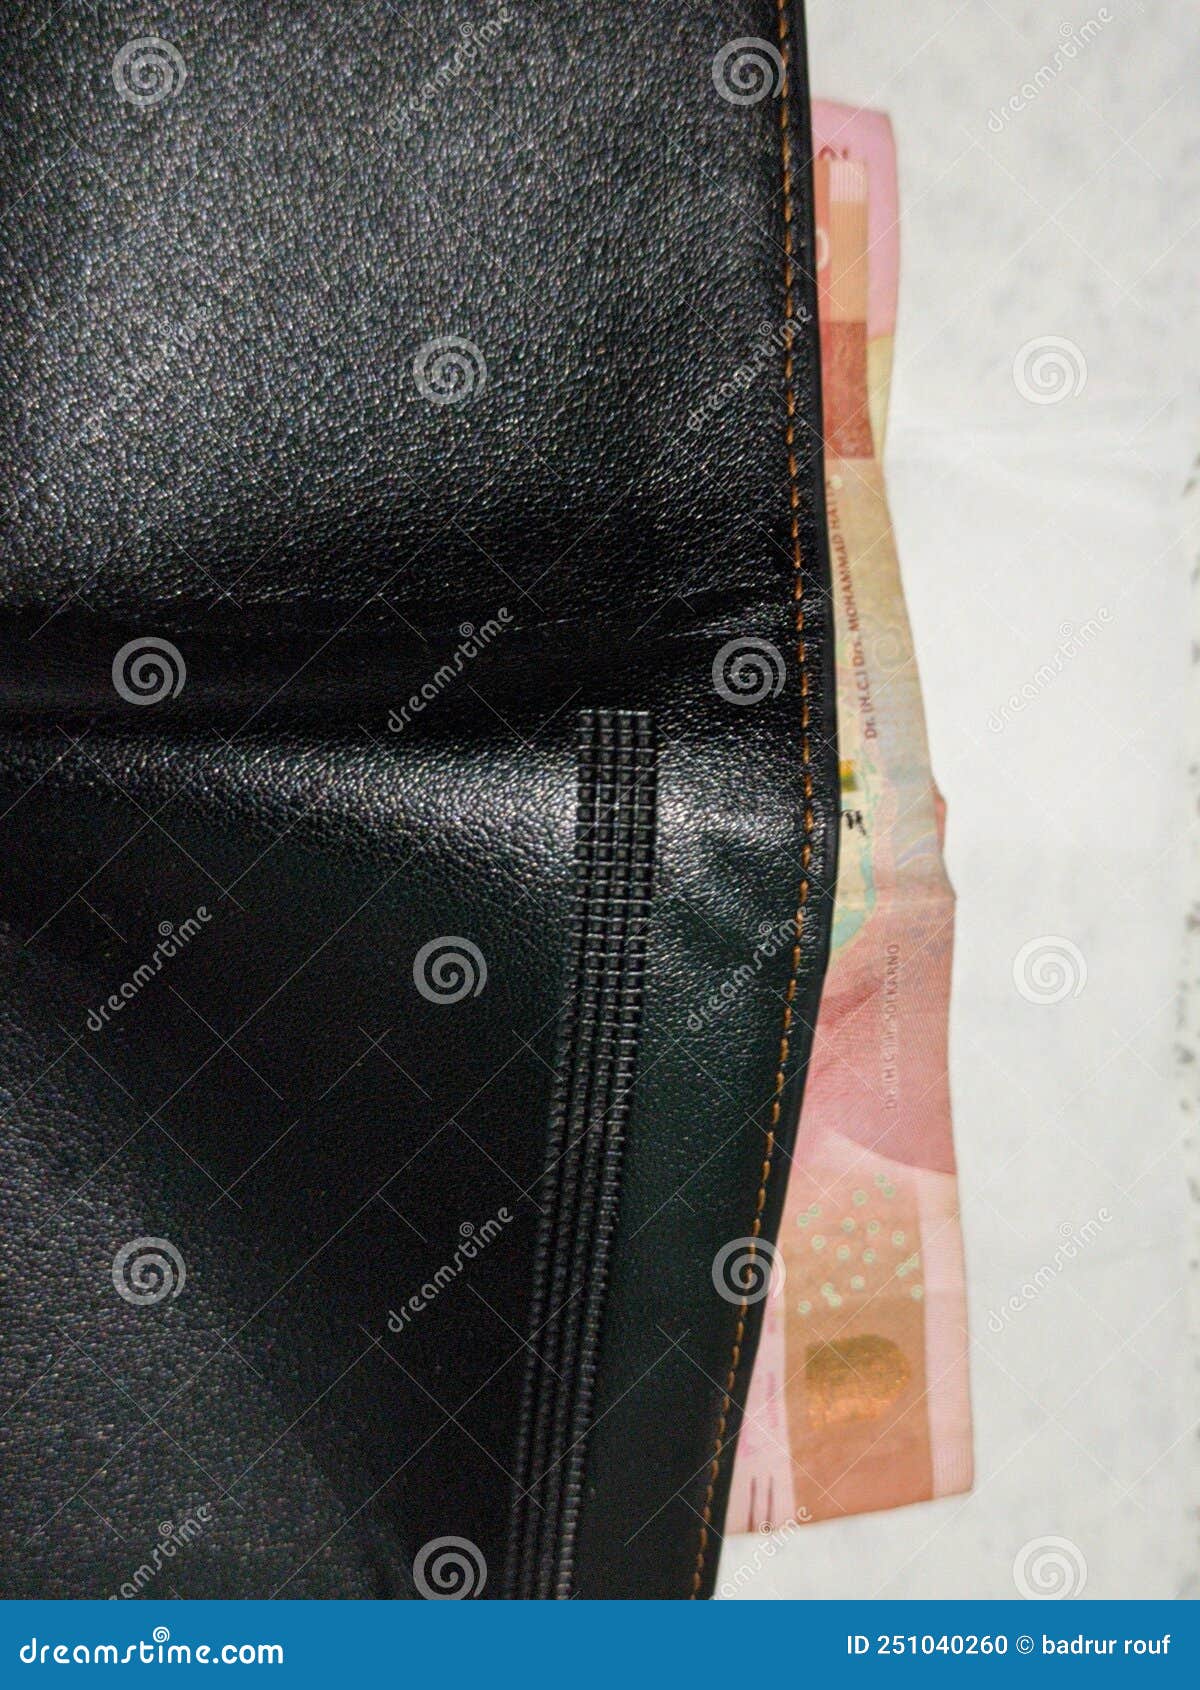 Wallet and 2 rupiah bills stock photo. Image of indonesian - 251040260